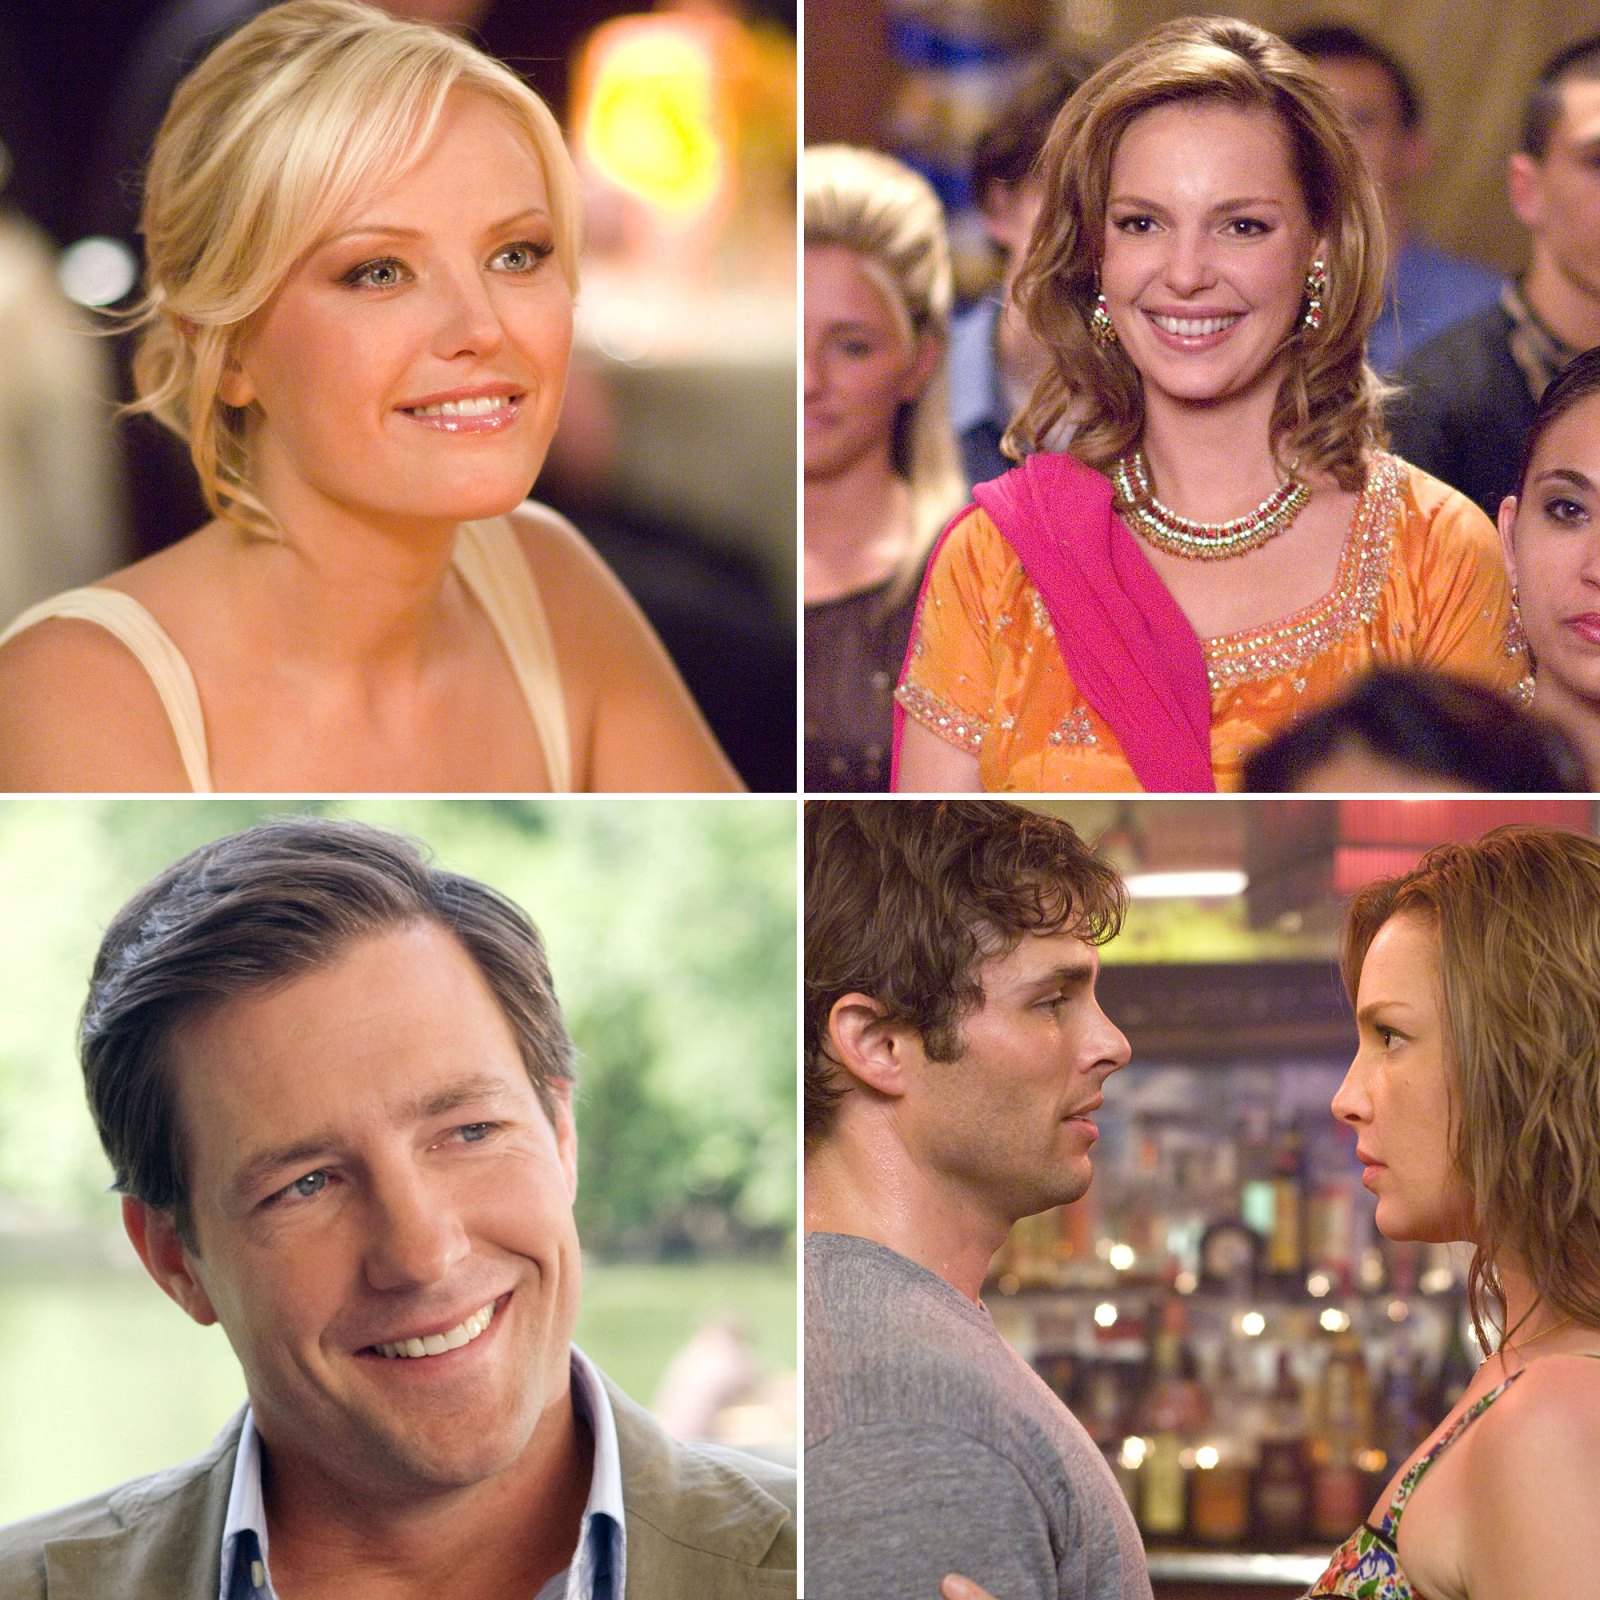 27 Dresses Cast Where Are They Now